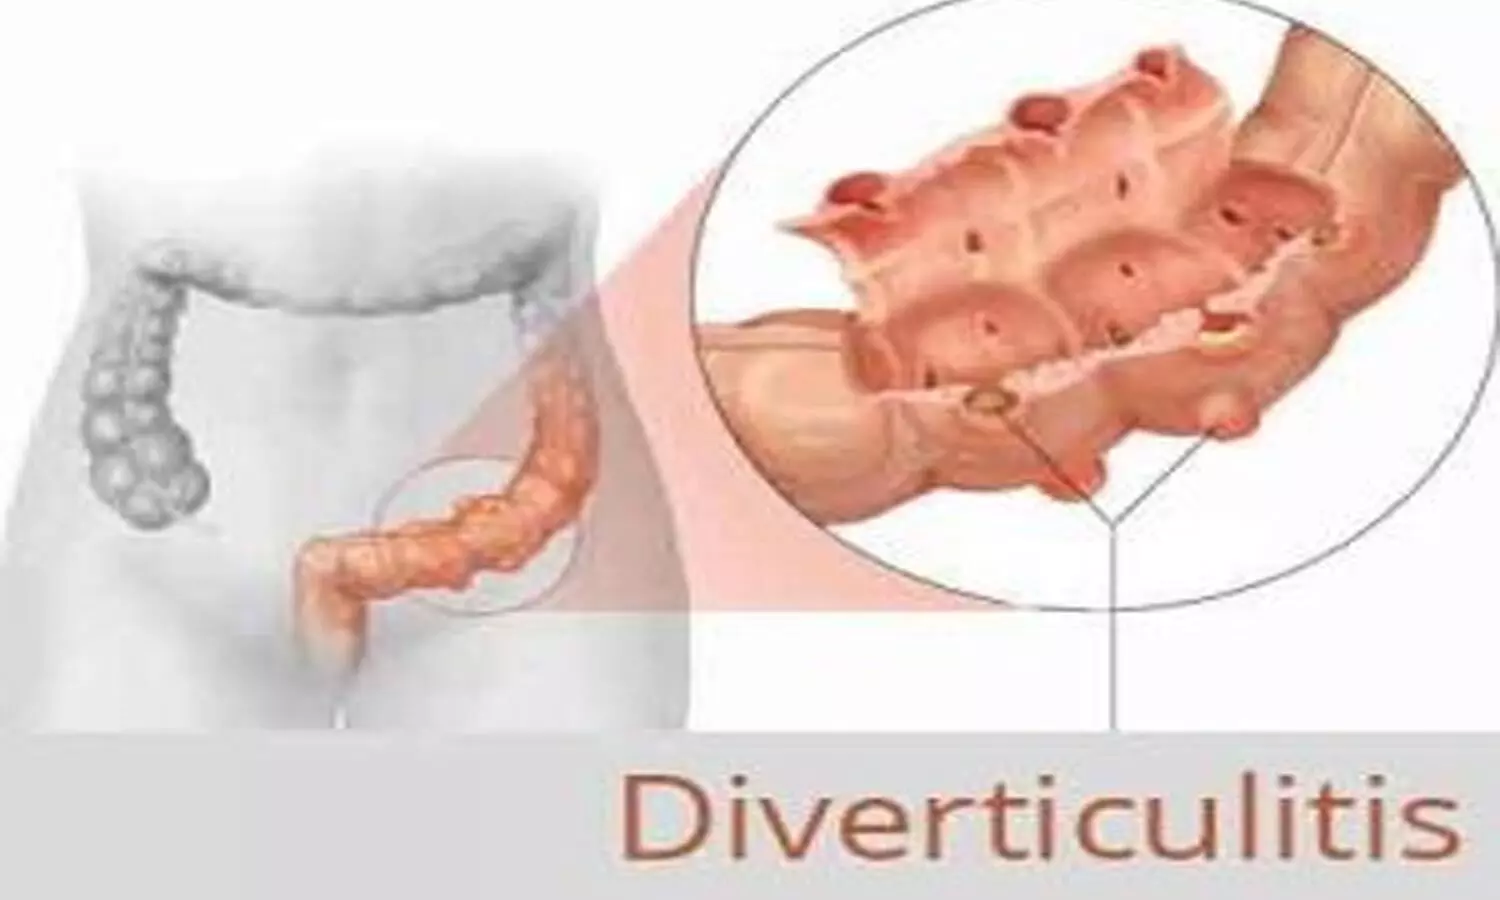 Sigmoid resection improves QOL in patients with recurrent diverticulitis: JAMA Surgery